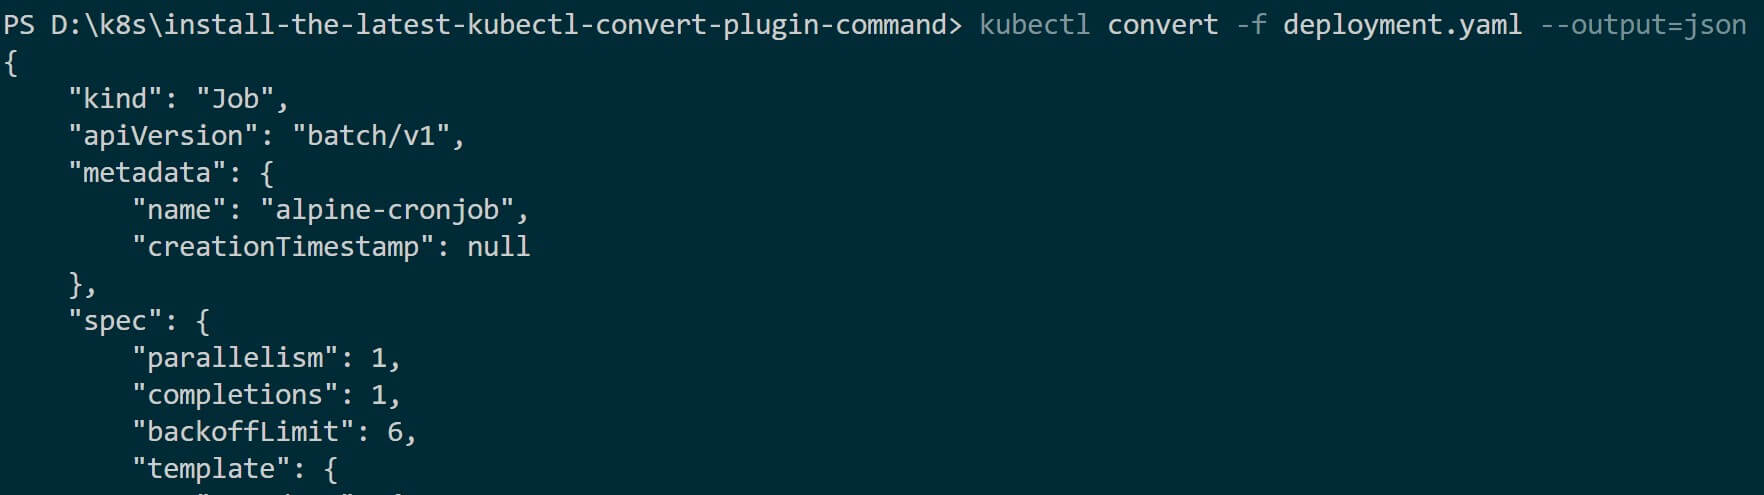 Install and Use the Latest Kubectl Convert Plugin